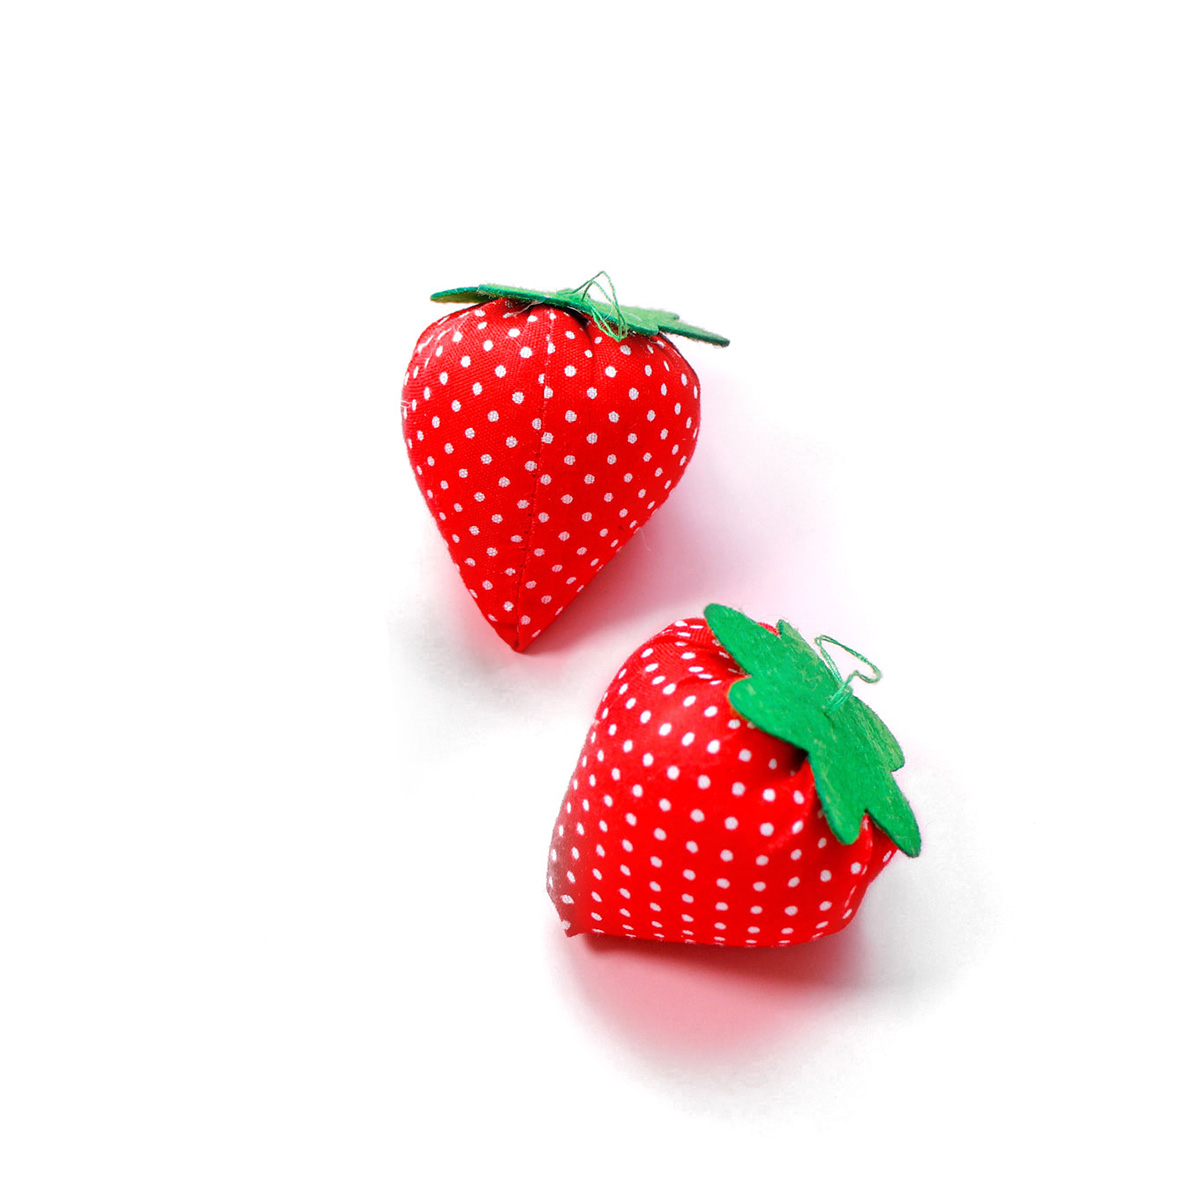 2PCS Strawberry Shaped Soft Fabric Needles Pins Cushion, Handcraft Tool Pillow Pincushion for embroidery